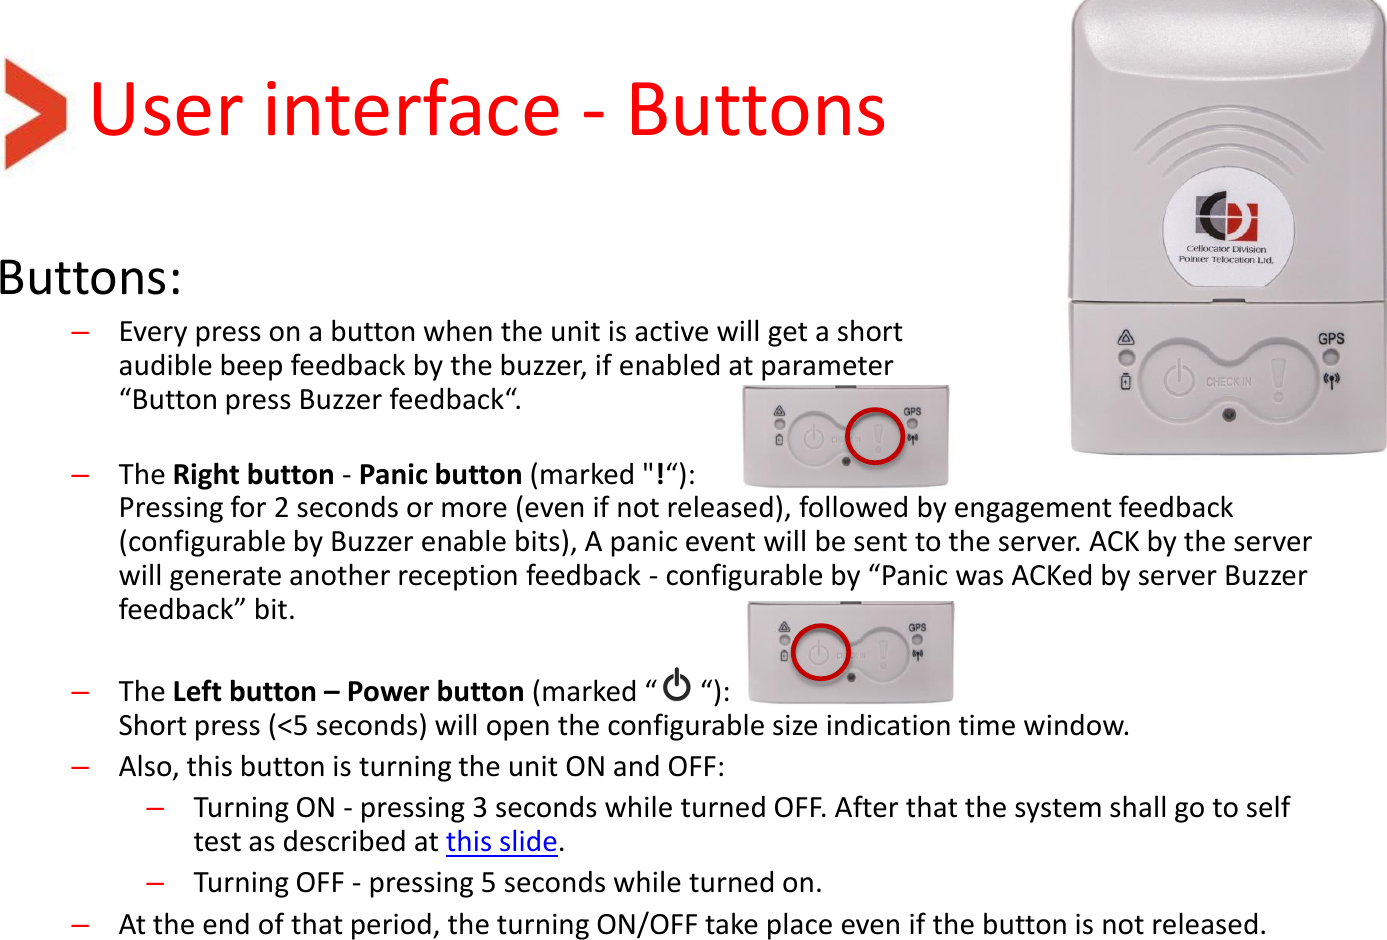 User interface - Buttons Buttons: –Every press on a button when the unit is active will get a short audible beep feedback by the buzzer, if enabled at parameter  “Button press Buzzer feedback“.  –The Right button - Panic button (marked &quot;!“):  Pressing for 2 seconds or more (even if not released), followed by engagement feedback (configurable by Buzzer enable bits), A panic event will be sent to the server. ACK by the server will generate another reception feedback - configurable by “Panic was ACKed by server Buzzer feedback” bit.   –The Left button – Power button (marked “      “): Short press (&lt;5 seconds) will open the configurable size indication time window. –Also, this button is turning the unit ON and OFF: –Turning ON - pressing 3 seconds while turned OFF. After that the system shall go to self test as described at this slide. –Turning OFF - pressing 5 seconds while turned on. –At the end of that period, the turning ON/OFF take place even if the button is not released.  